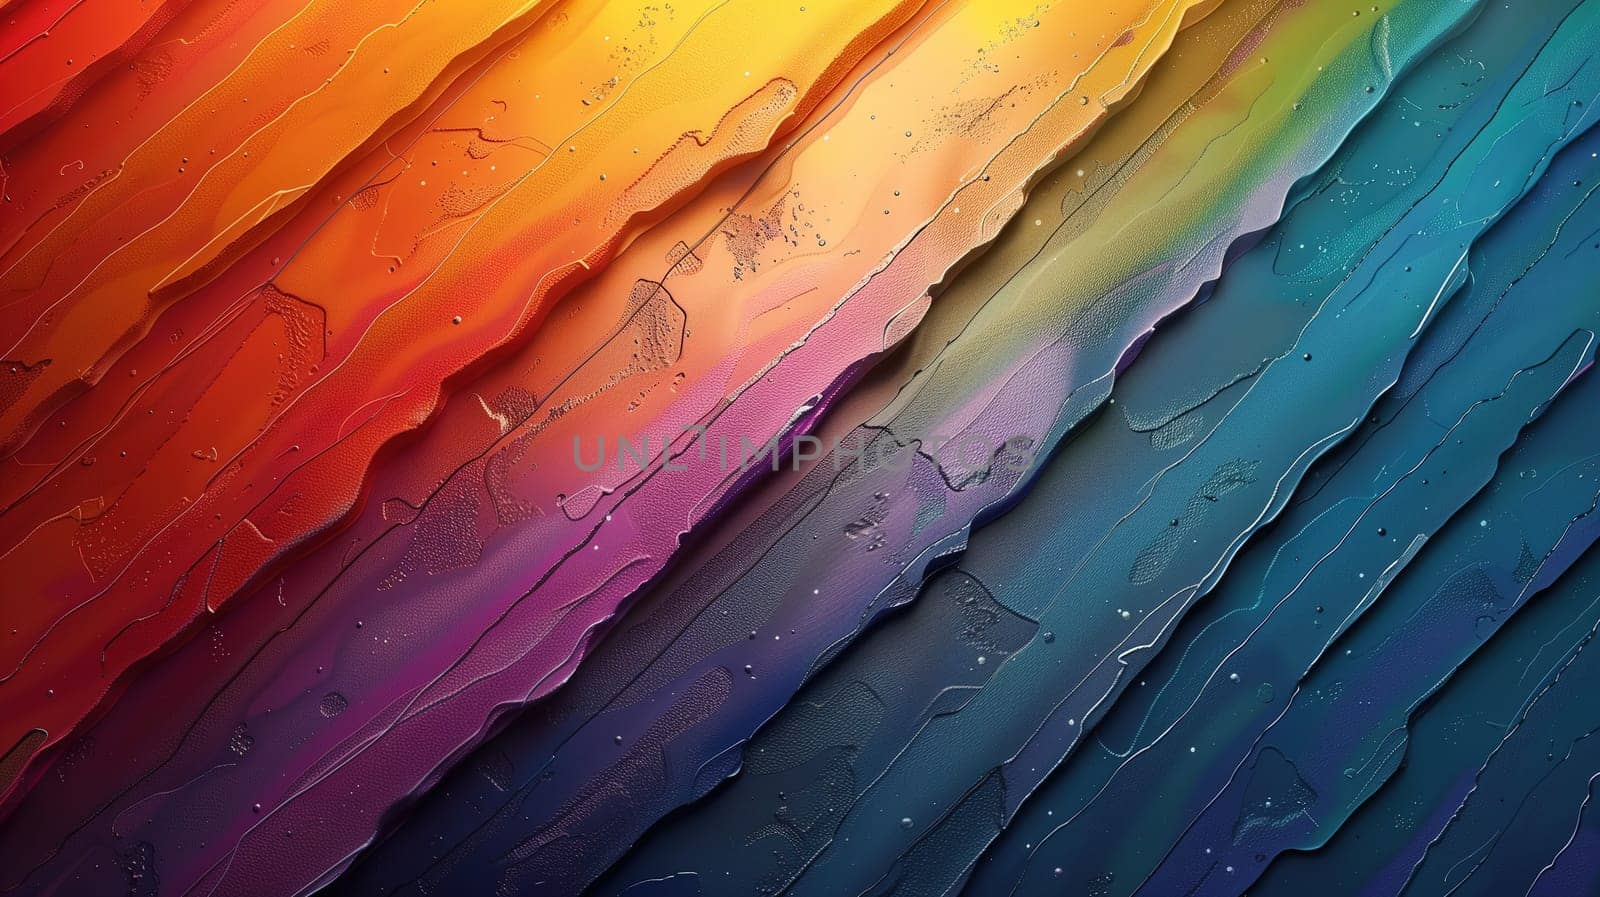 A textured surface is painted with a gradient of vibrant rainbow colors, symbolizing LGBT pride. The textured details and the flow of colors create a palpable sense of depth and movement, capturing the essence of diversity and unity.